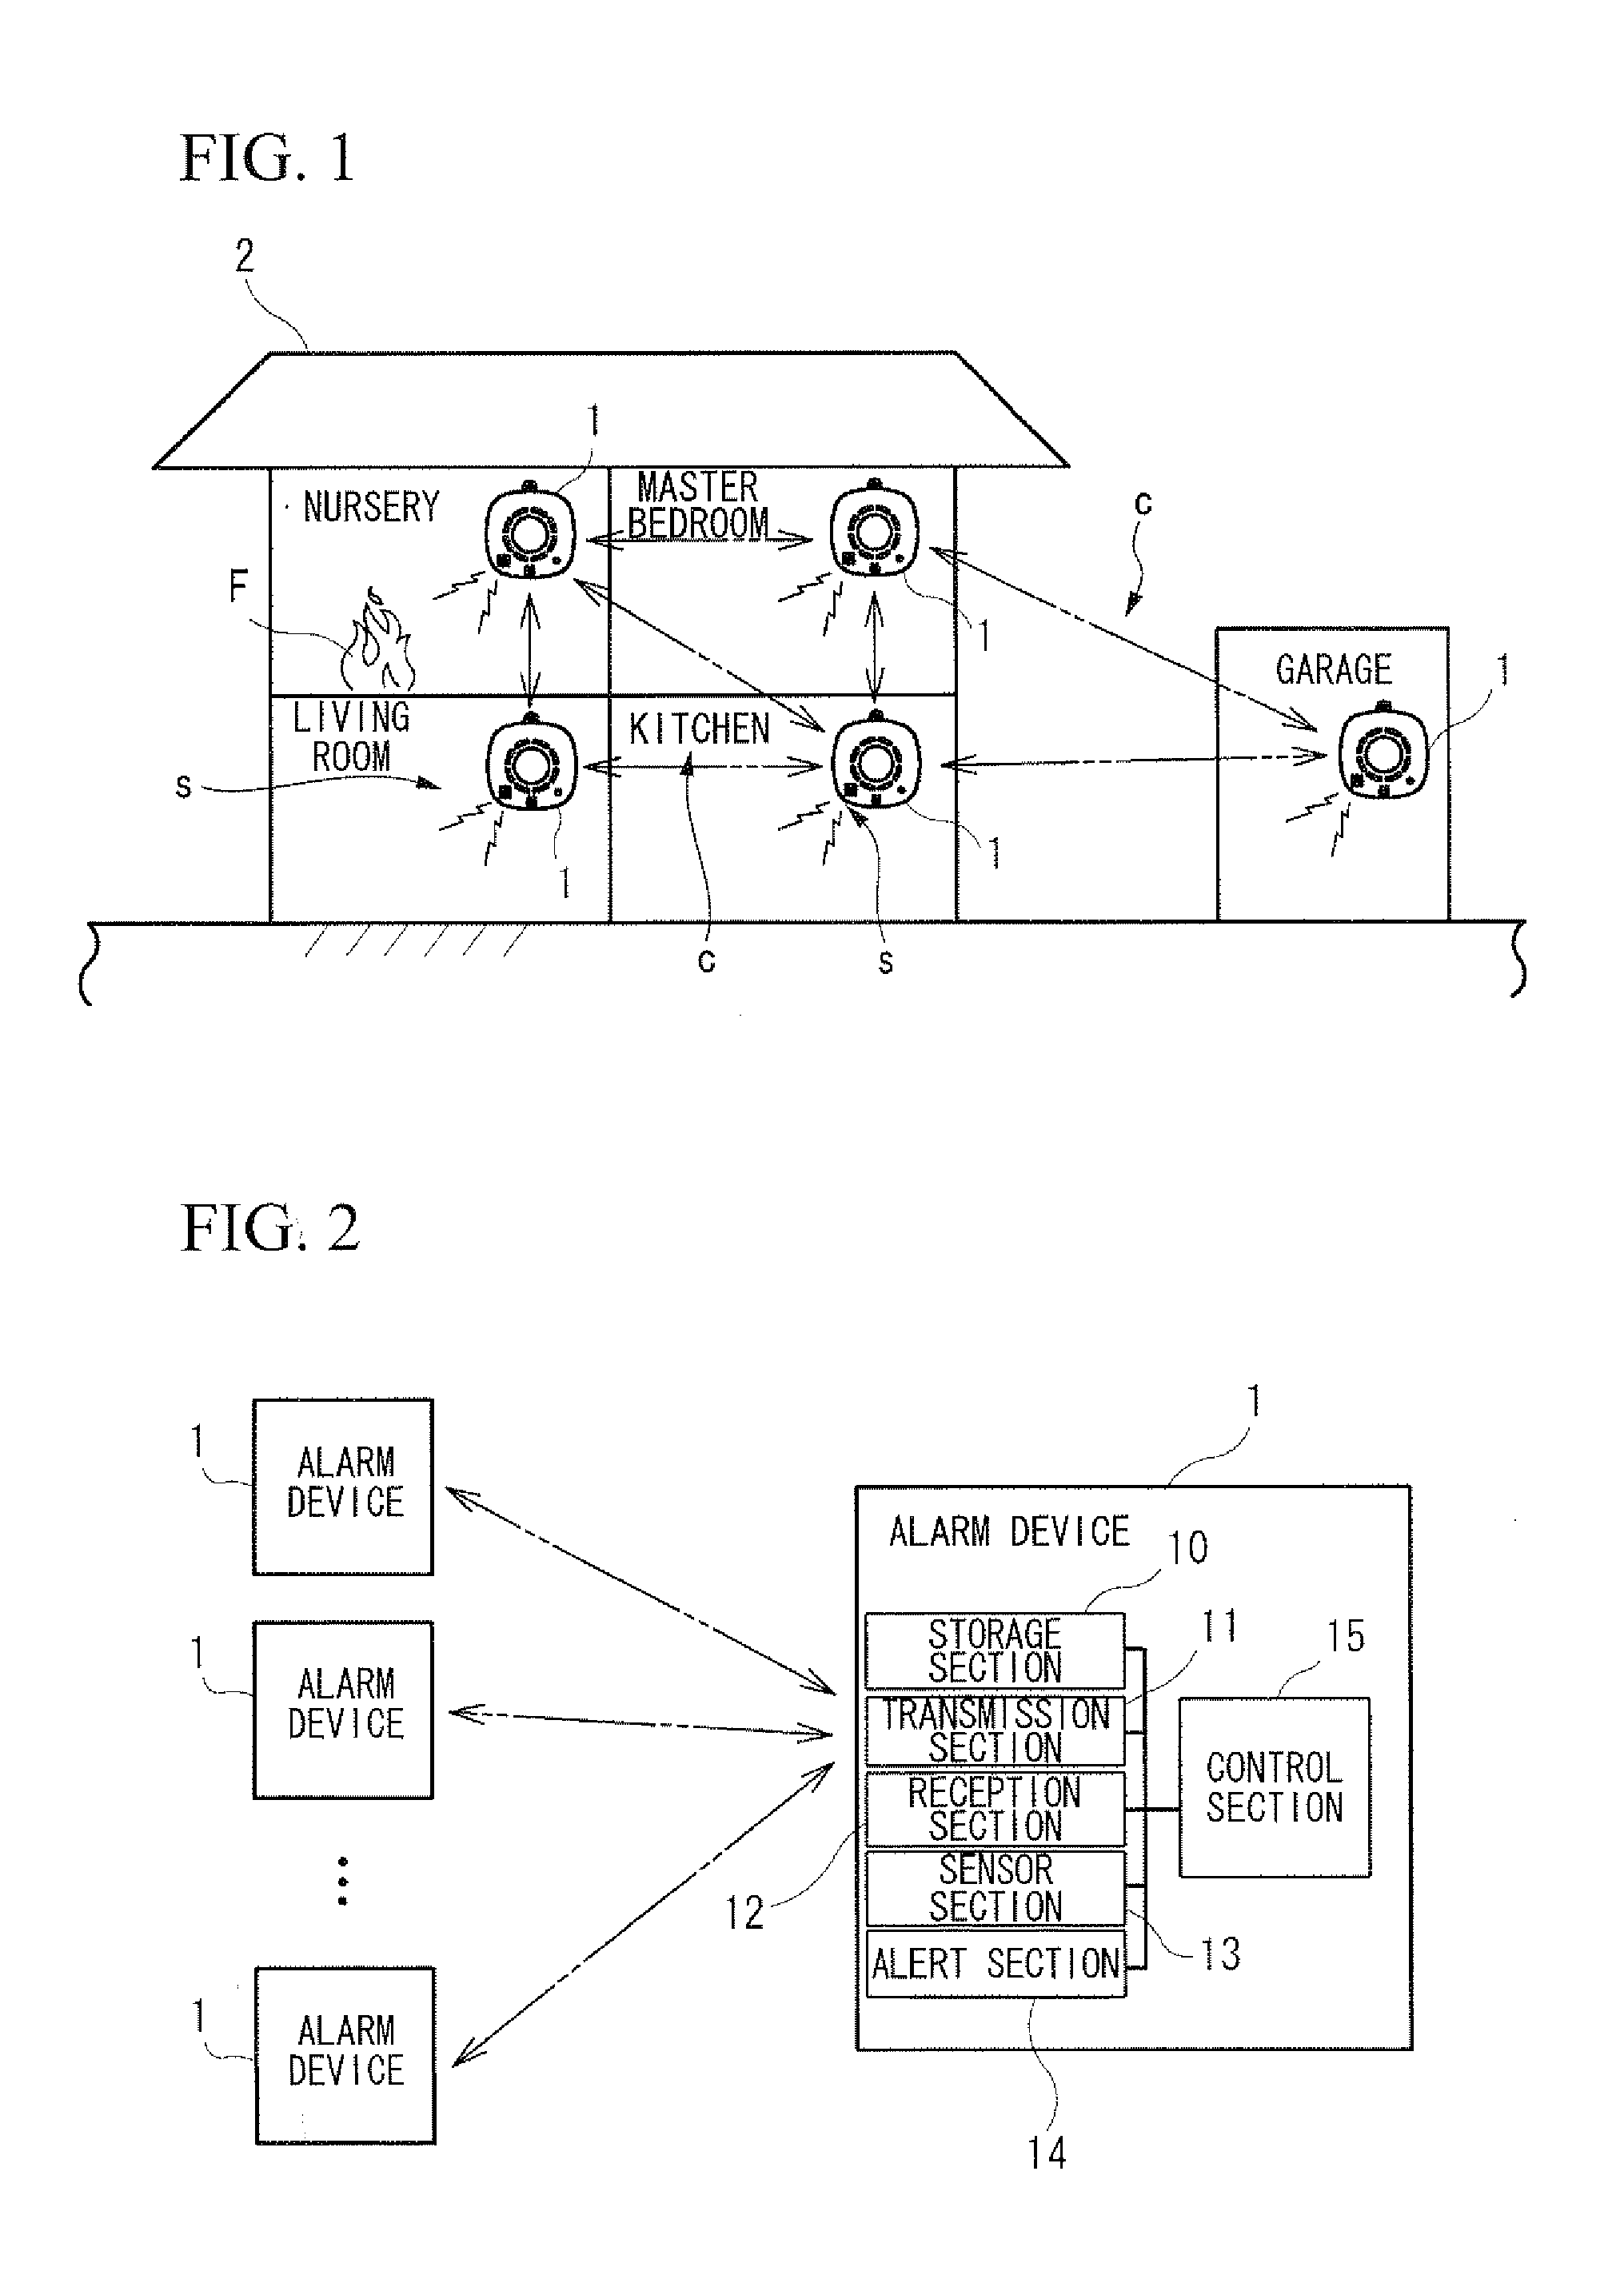 Communication system and alarm device